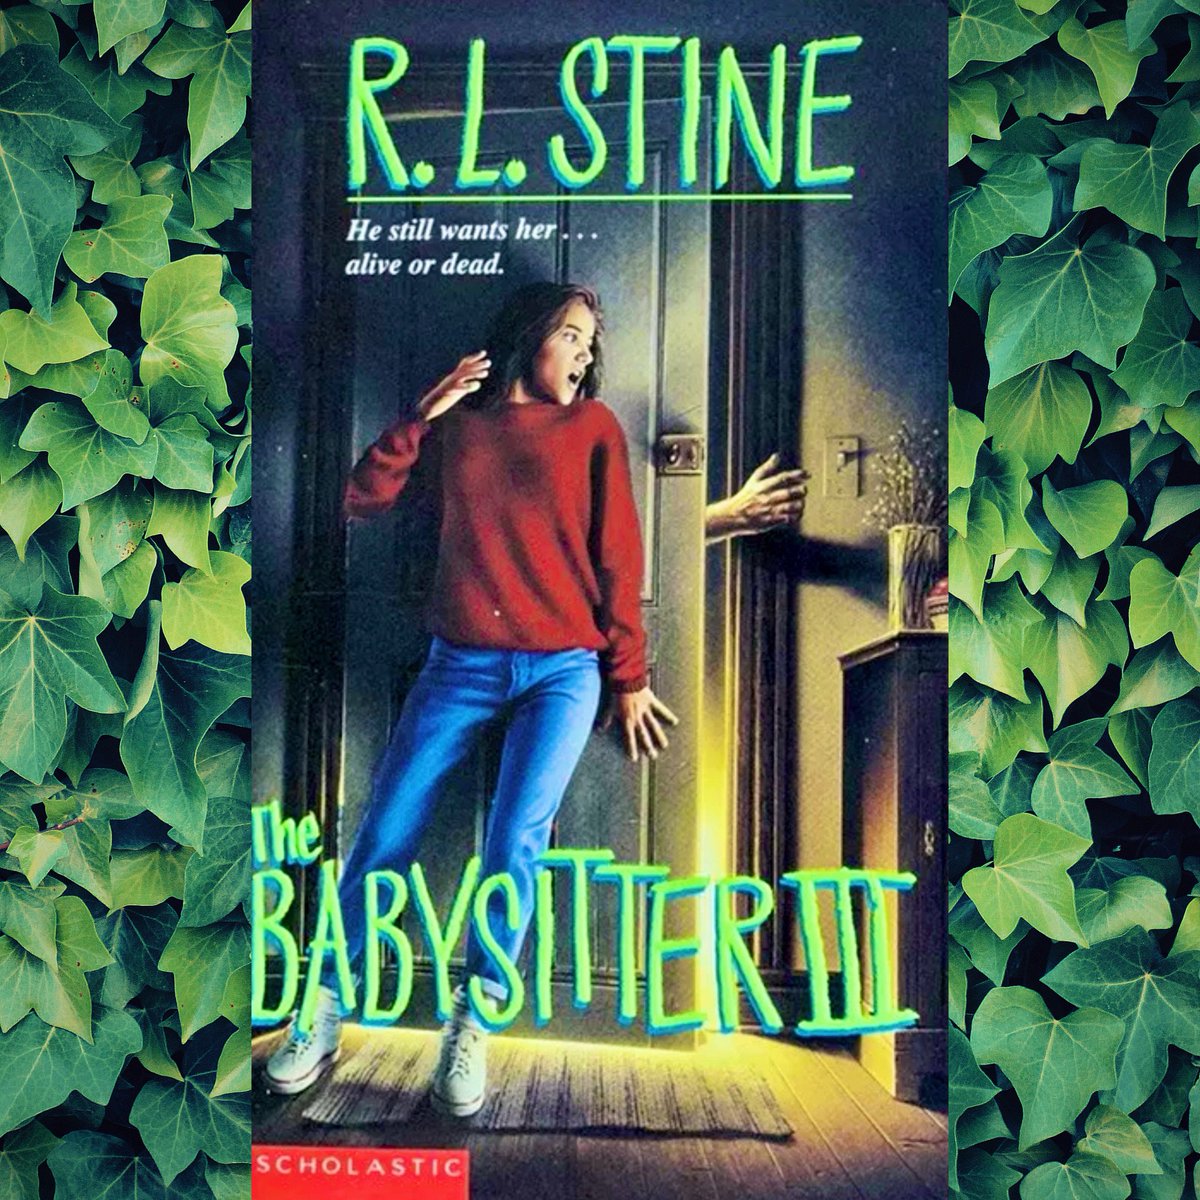 Mr. Hagen still wants Jenny... alive or dead. This week @kellynugee and @lindsaykatai read THE BABYSITTER III by R.L. STINE. They talk two flavors of cliffhanger and then basically just struuuugggggle until Kelly heroically describes the show 